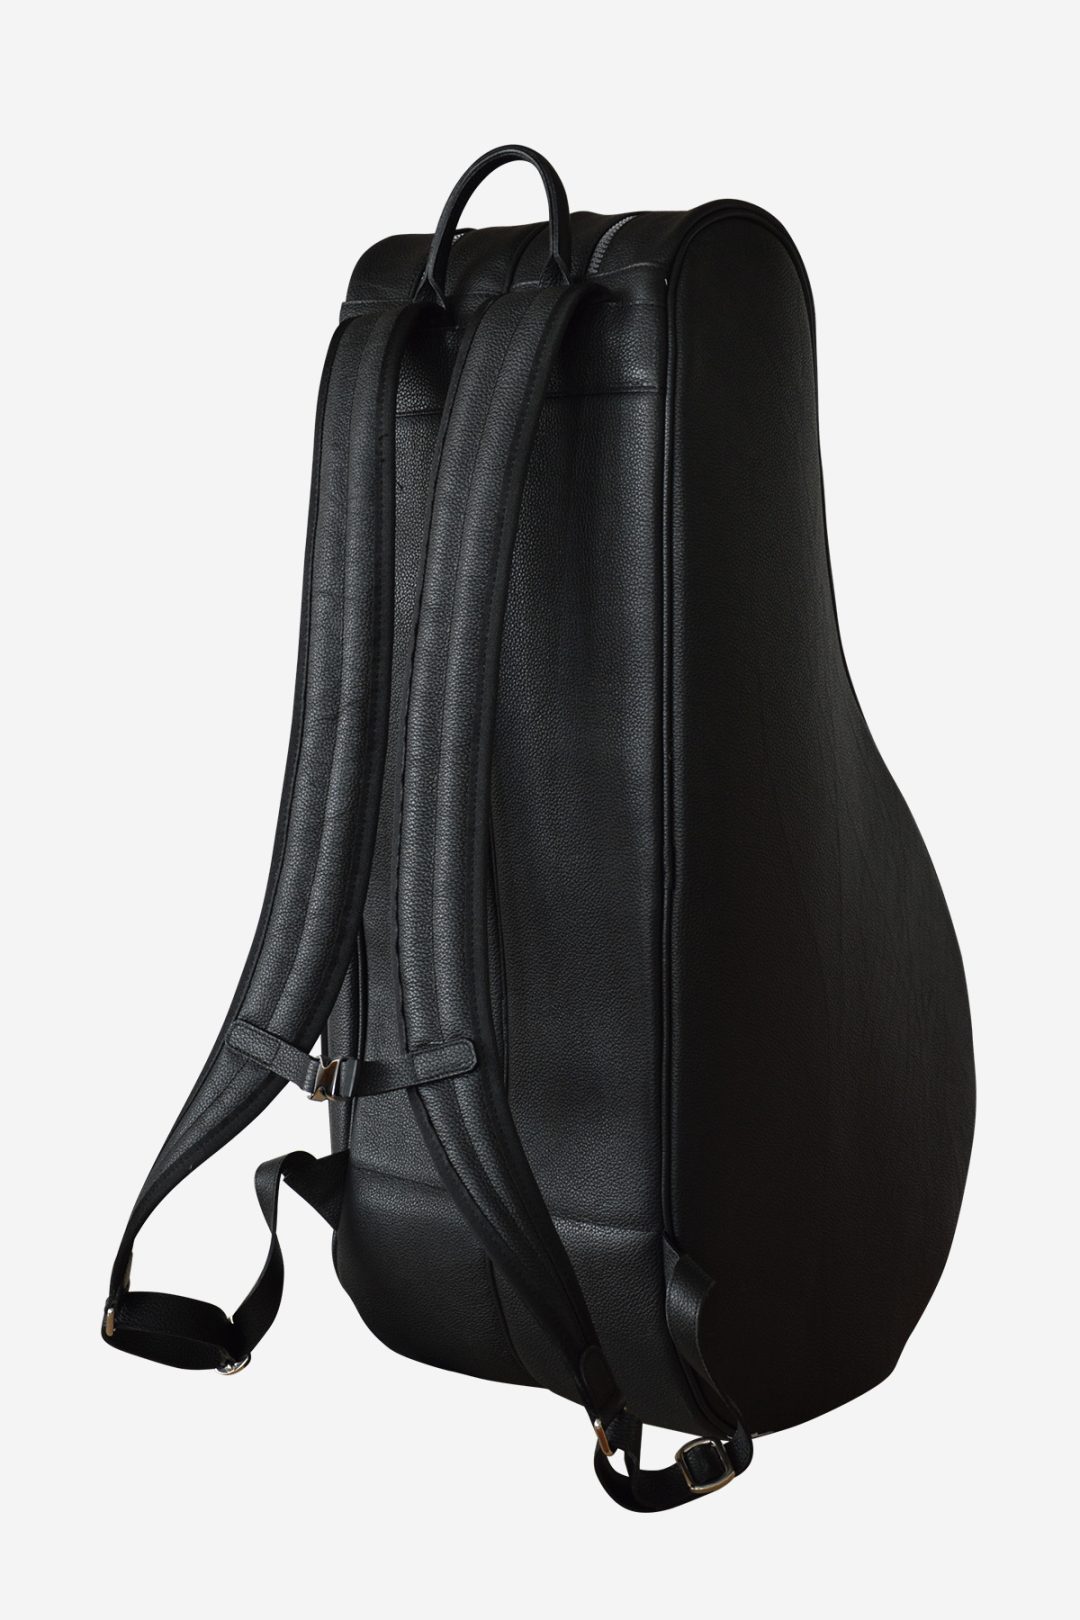 Classic Backpack Tennis Bag - Made in Italy, waterproof leather